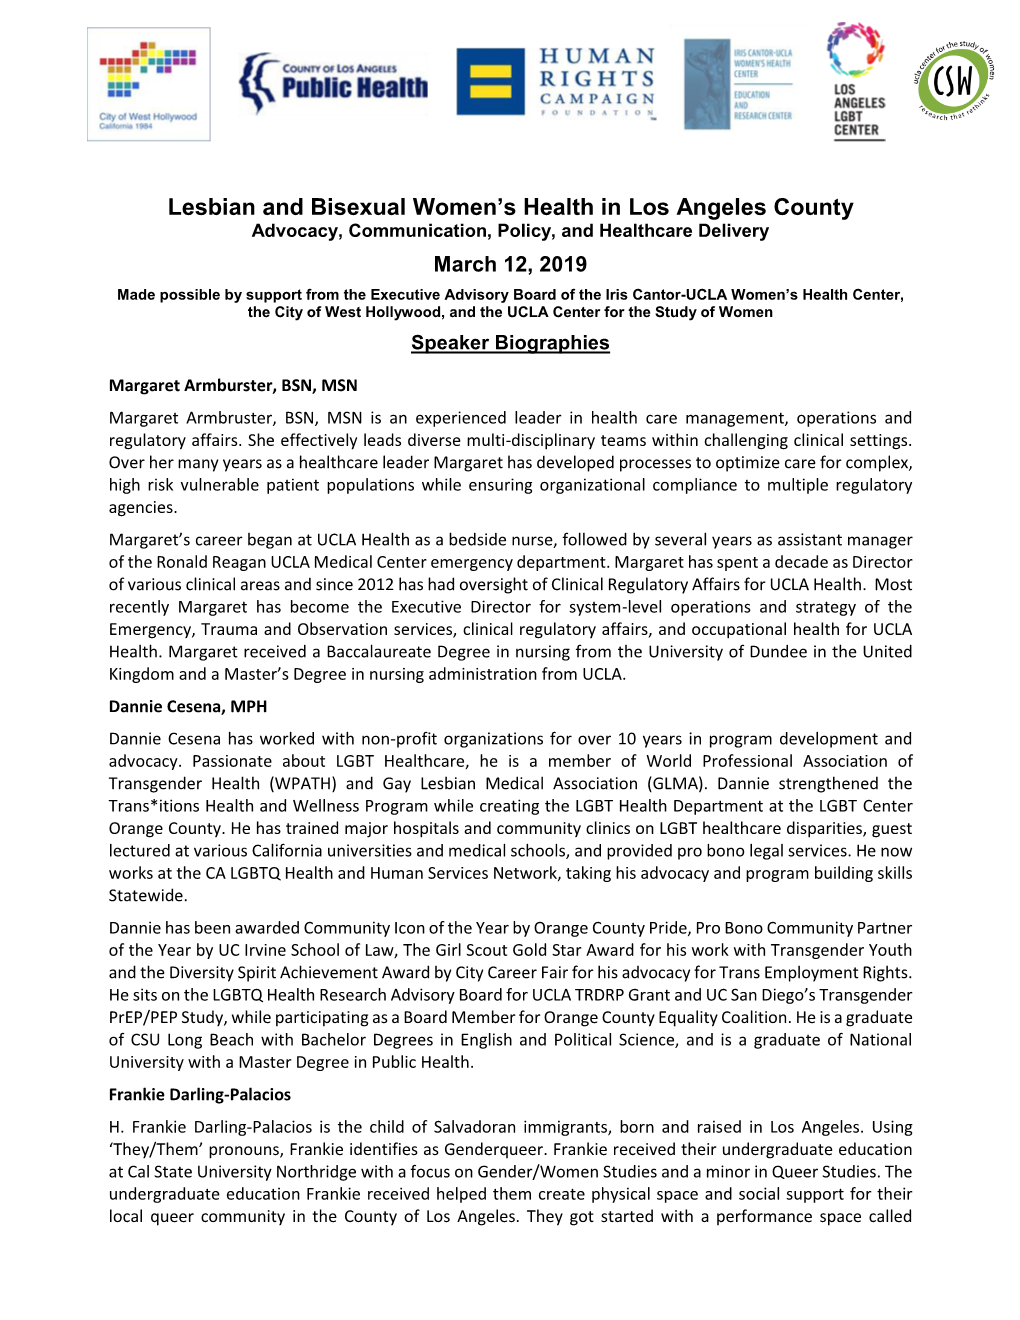 Lesbian and Bisexual Women's Health in Los Angeles County